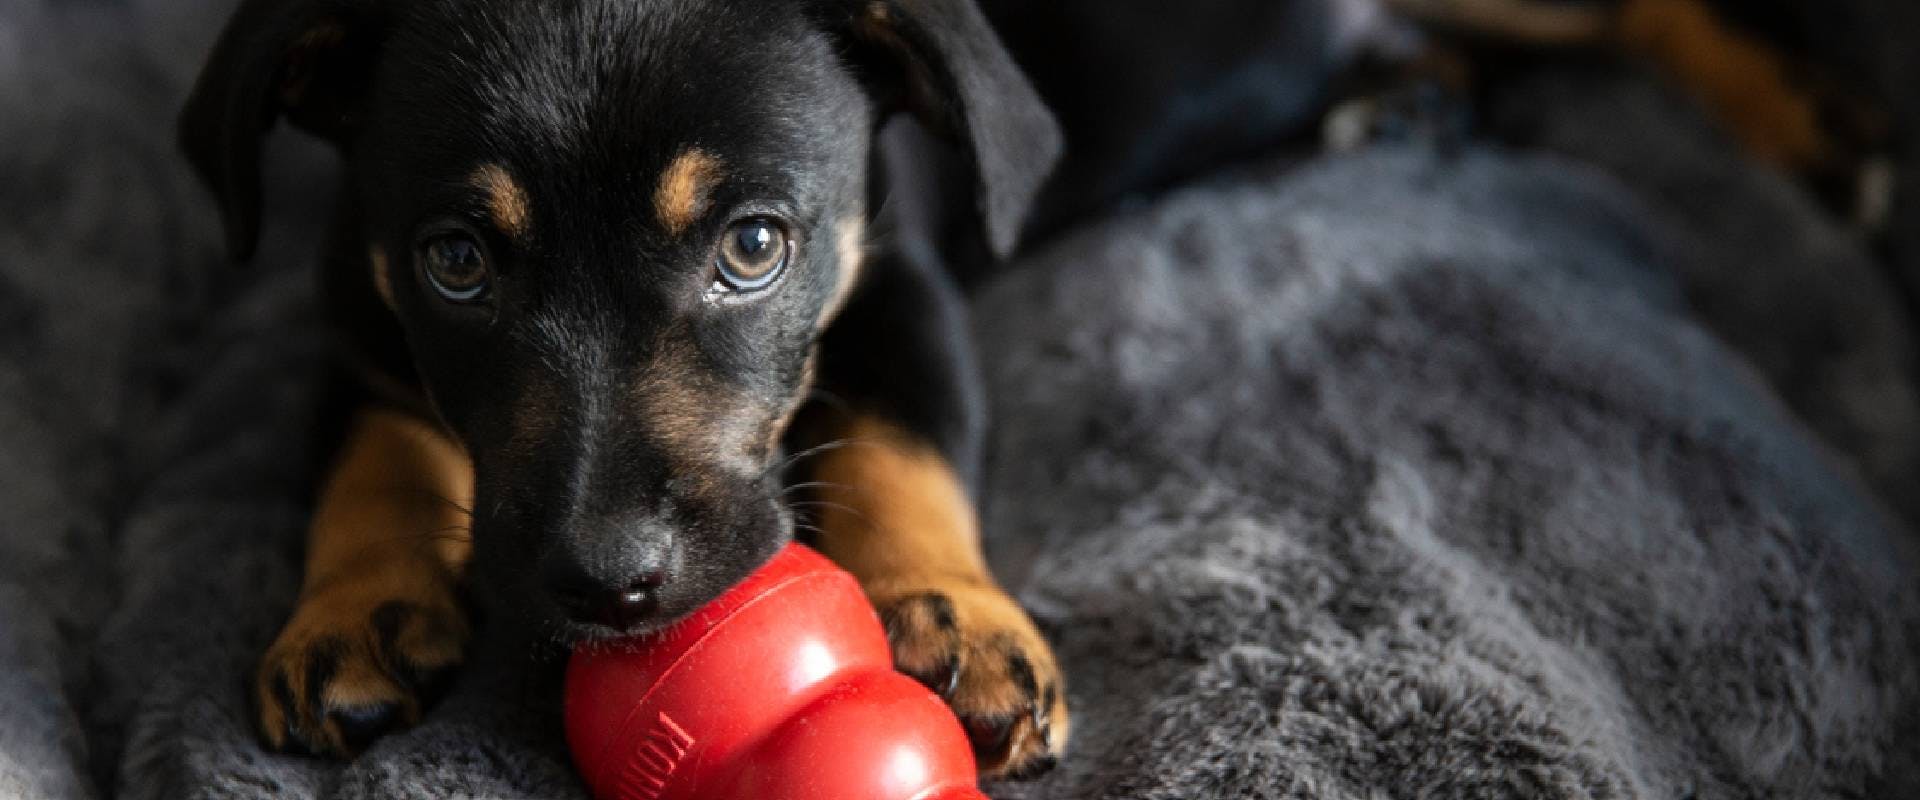 Puppy playing with a Kong ball - a stimulating dog toy